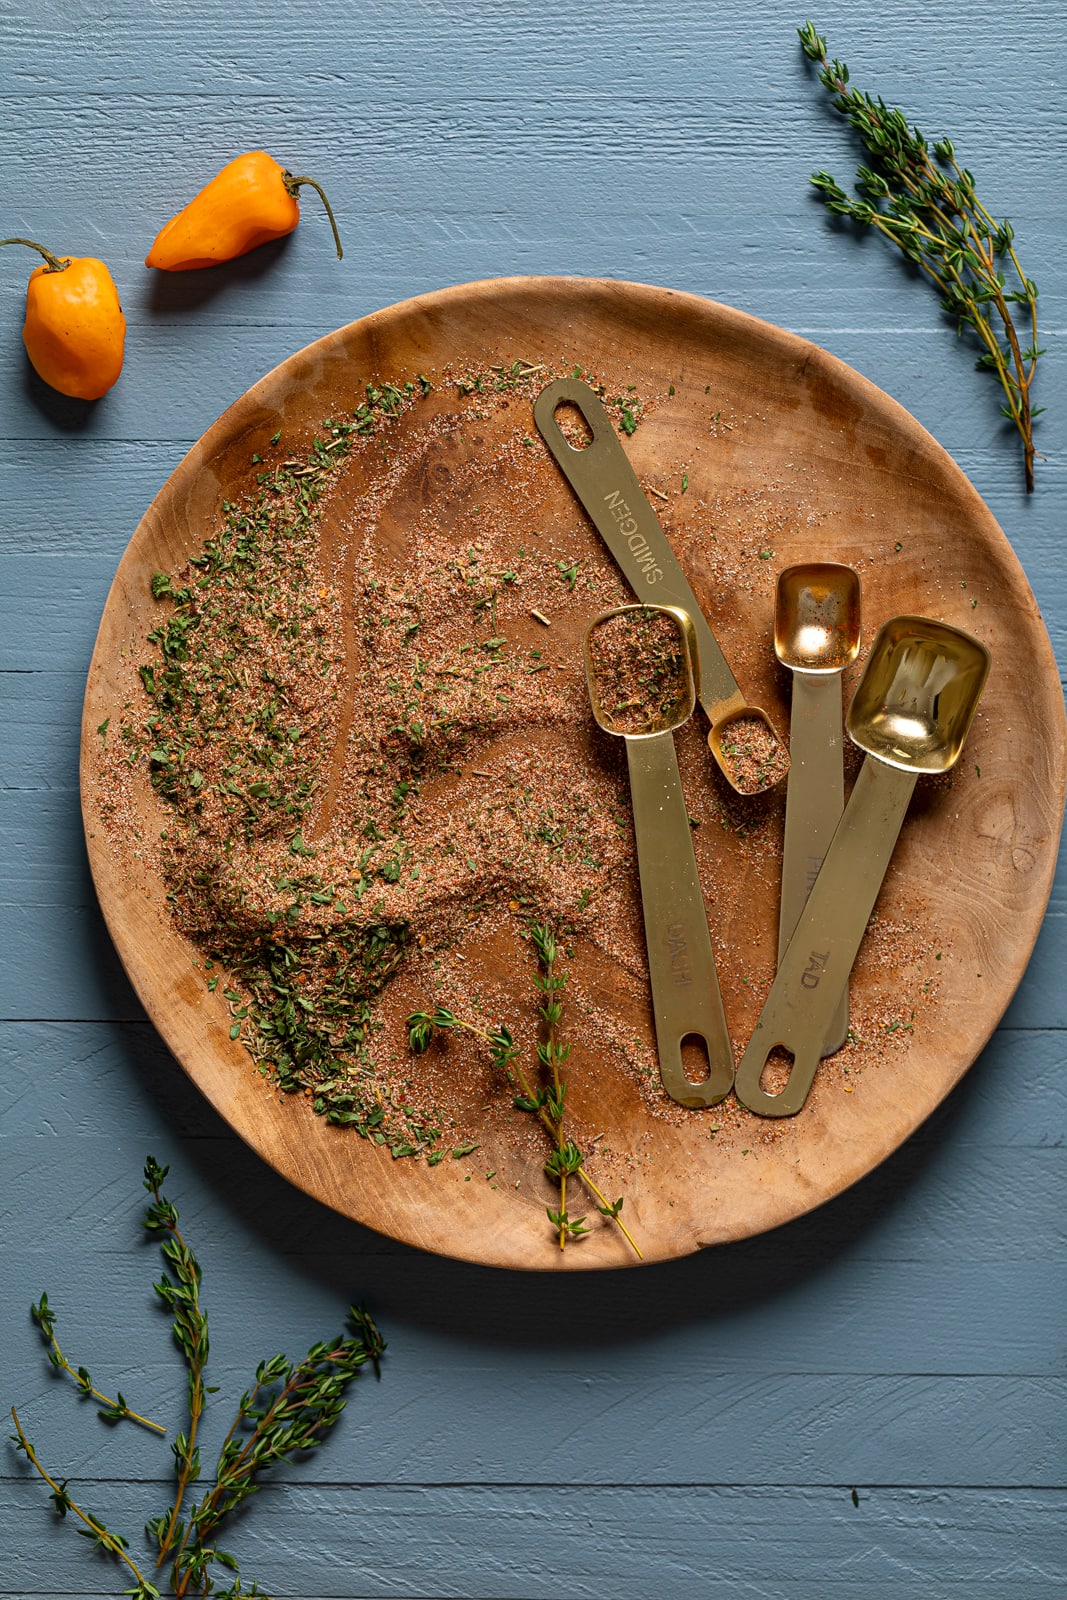 Seasonings and measuring spoons on a wooden plate